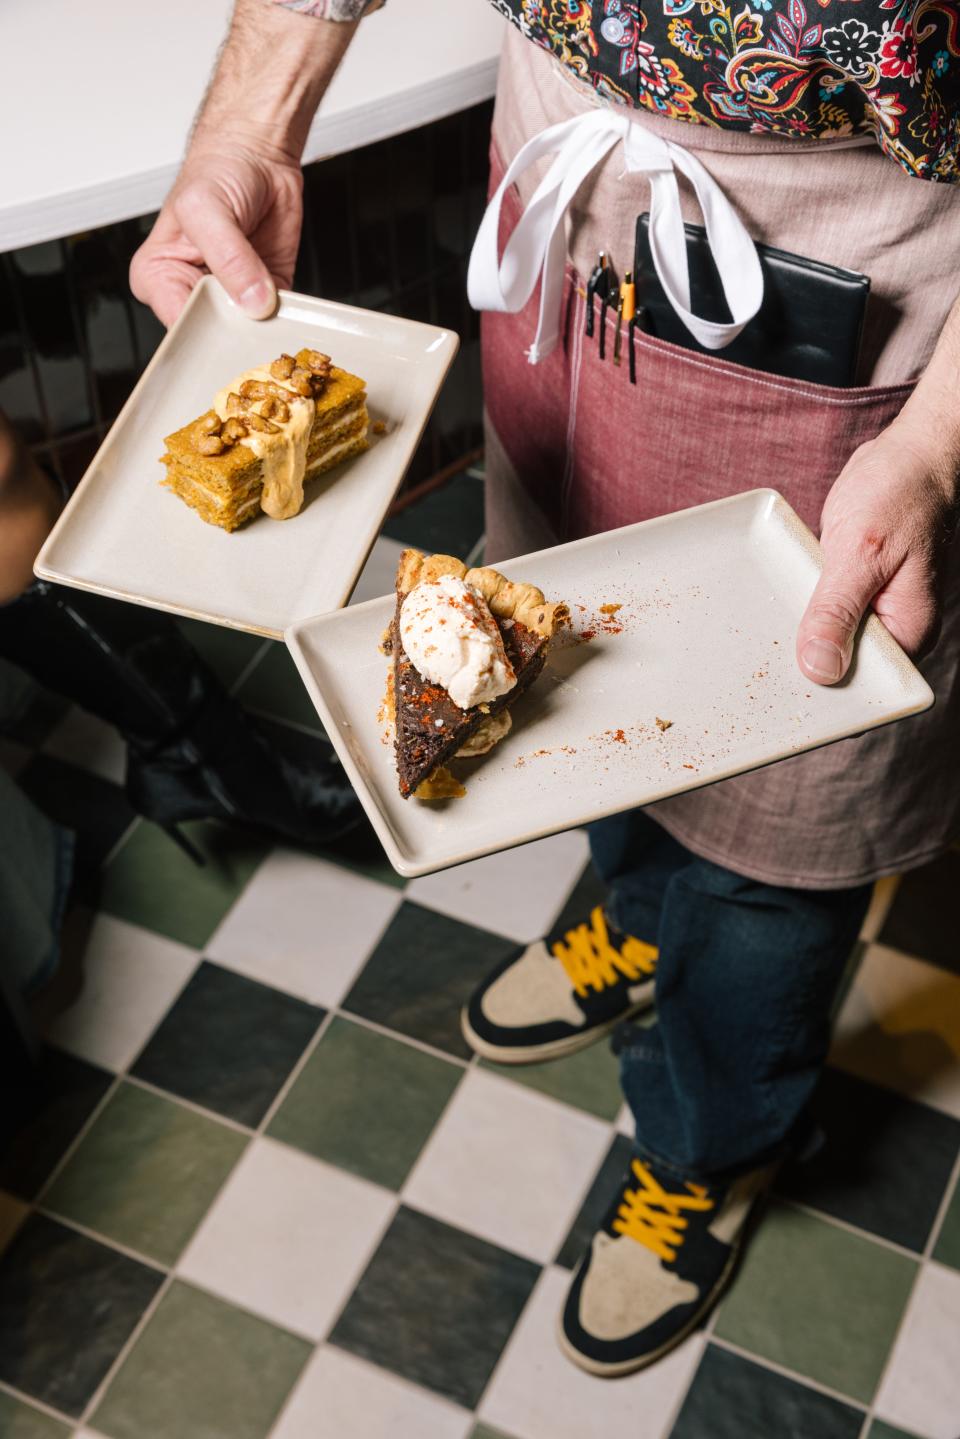 Golden Hour, a restaurant at The Radical boutique hotel, offers chocolate chess pie with clotted cream, and carrot cake made with carrot jam and curried cream.